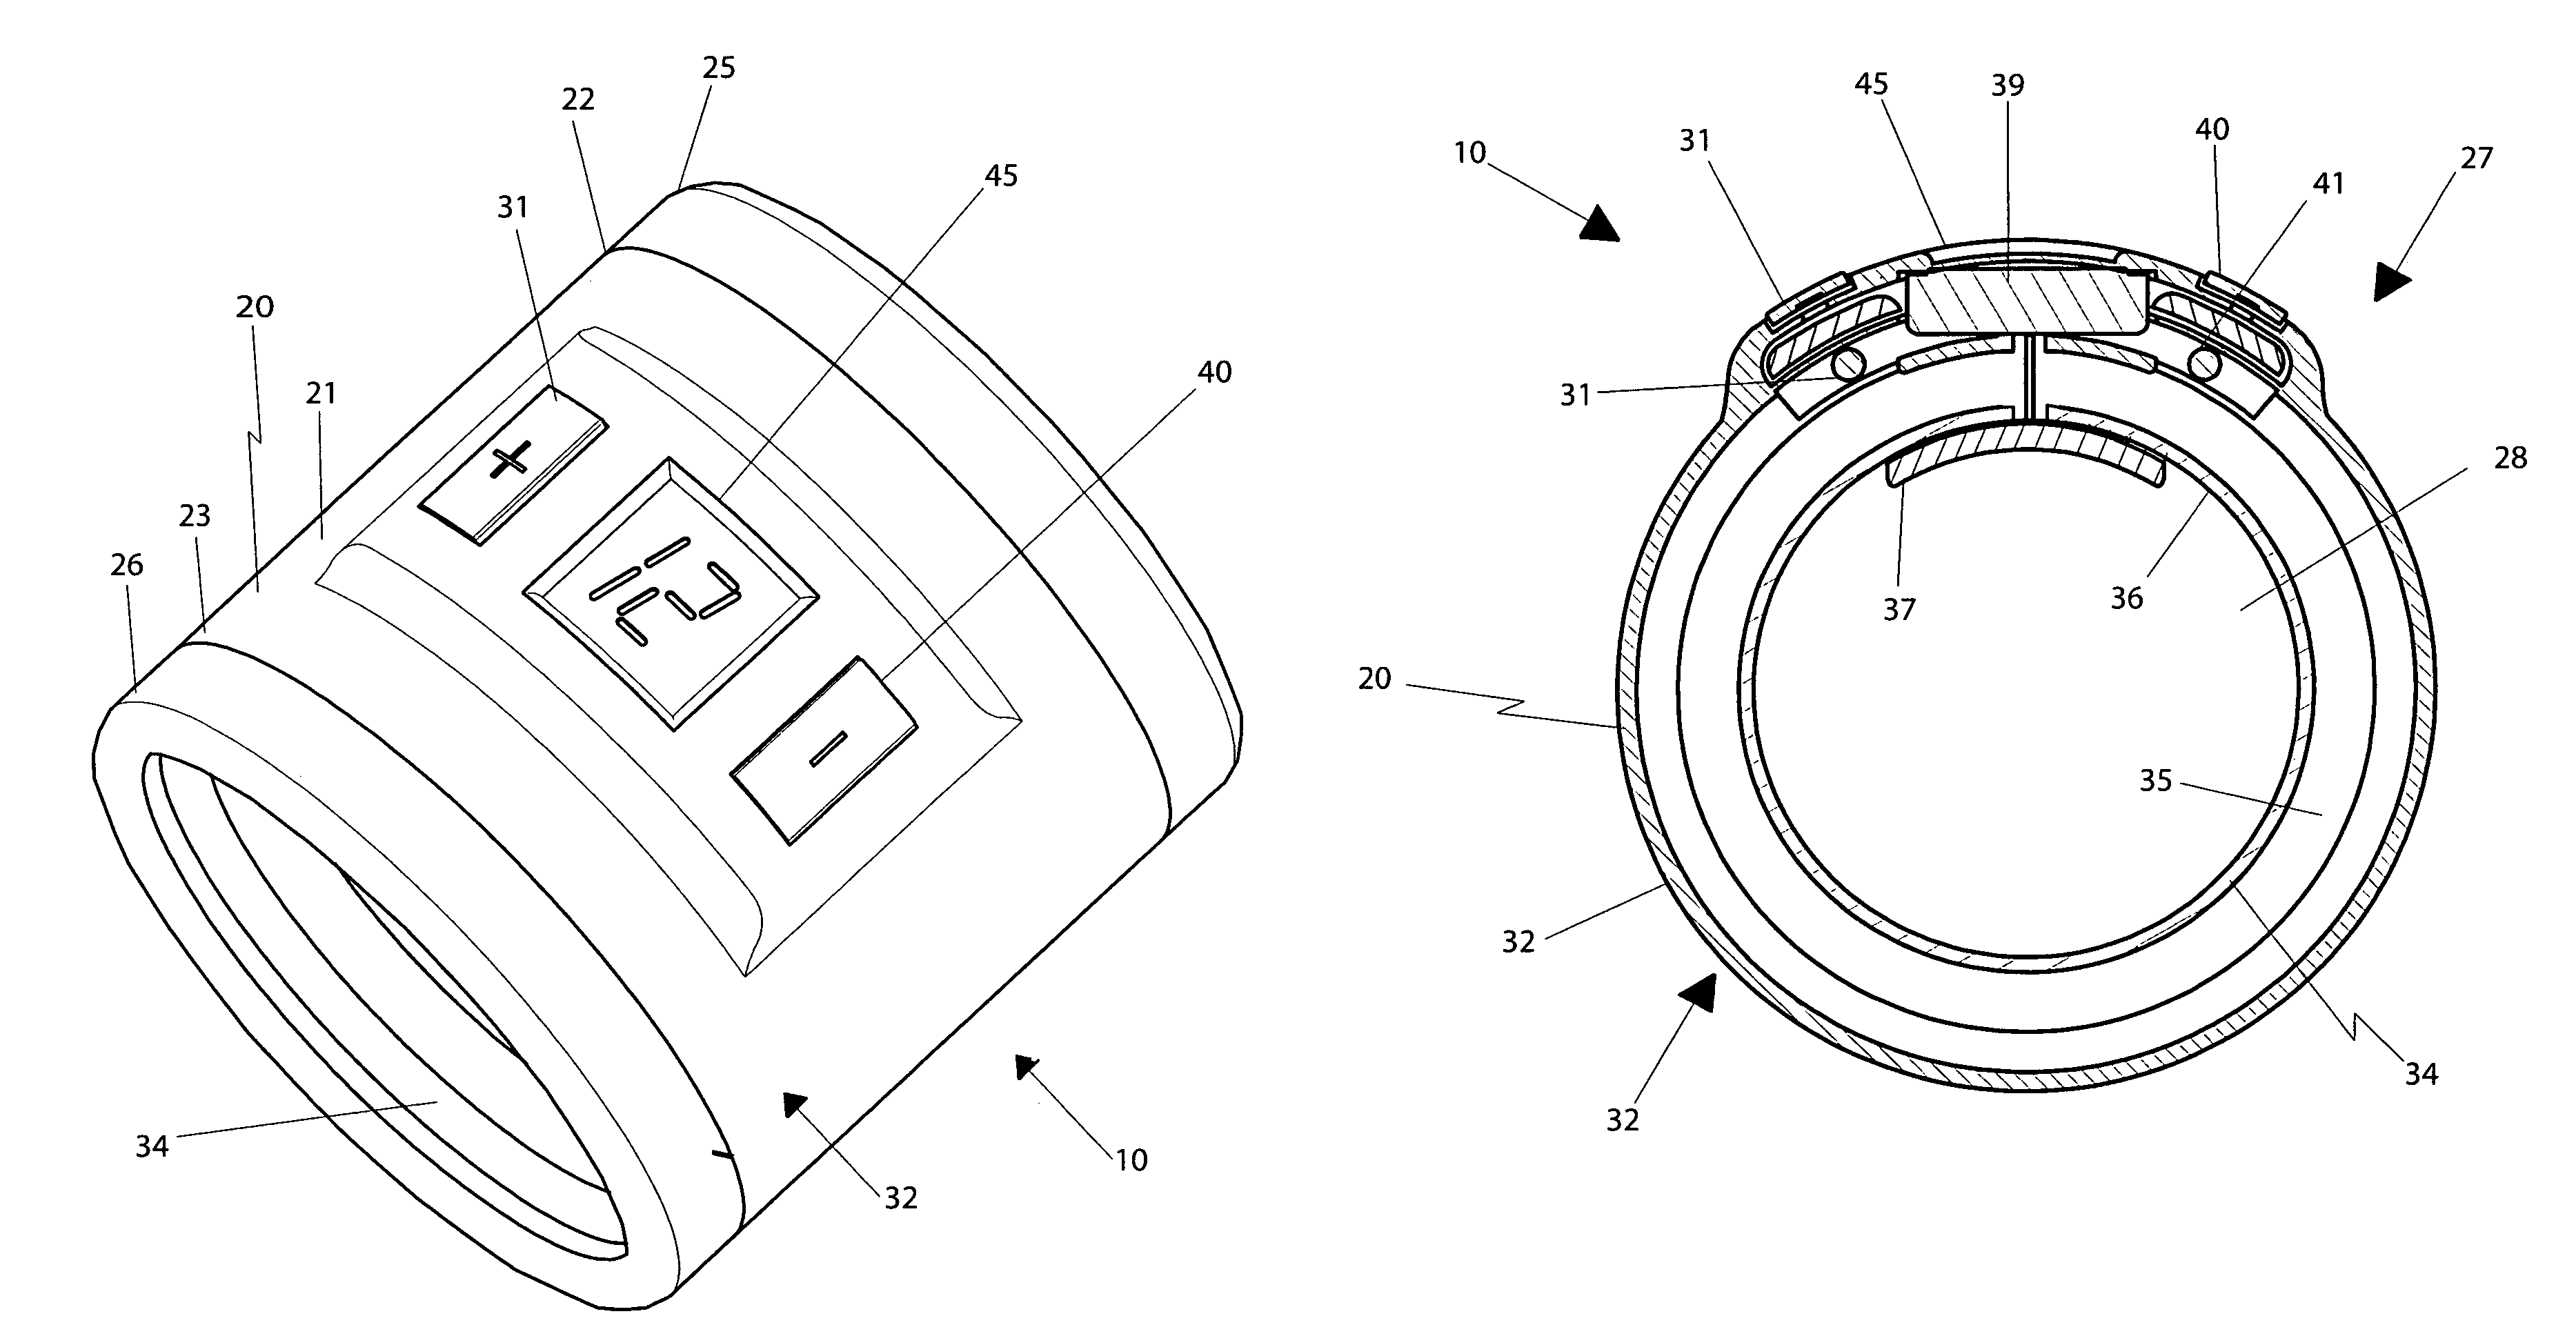 Digital ring sizing device and associated method